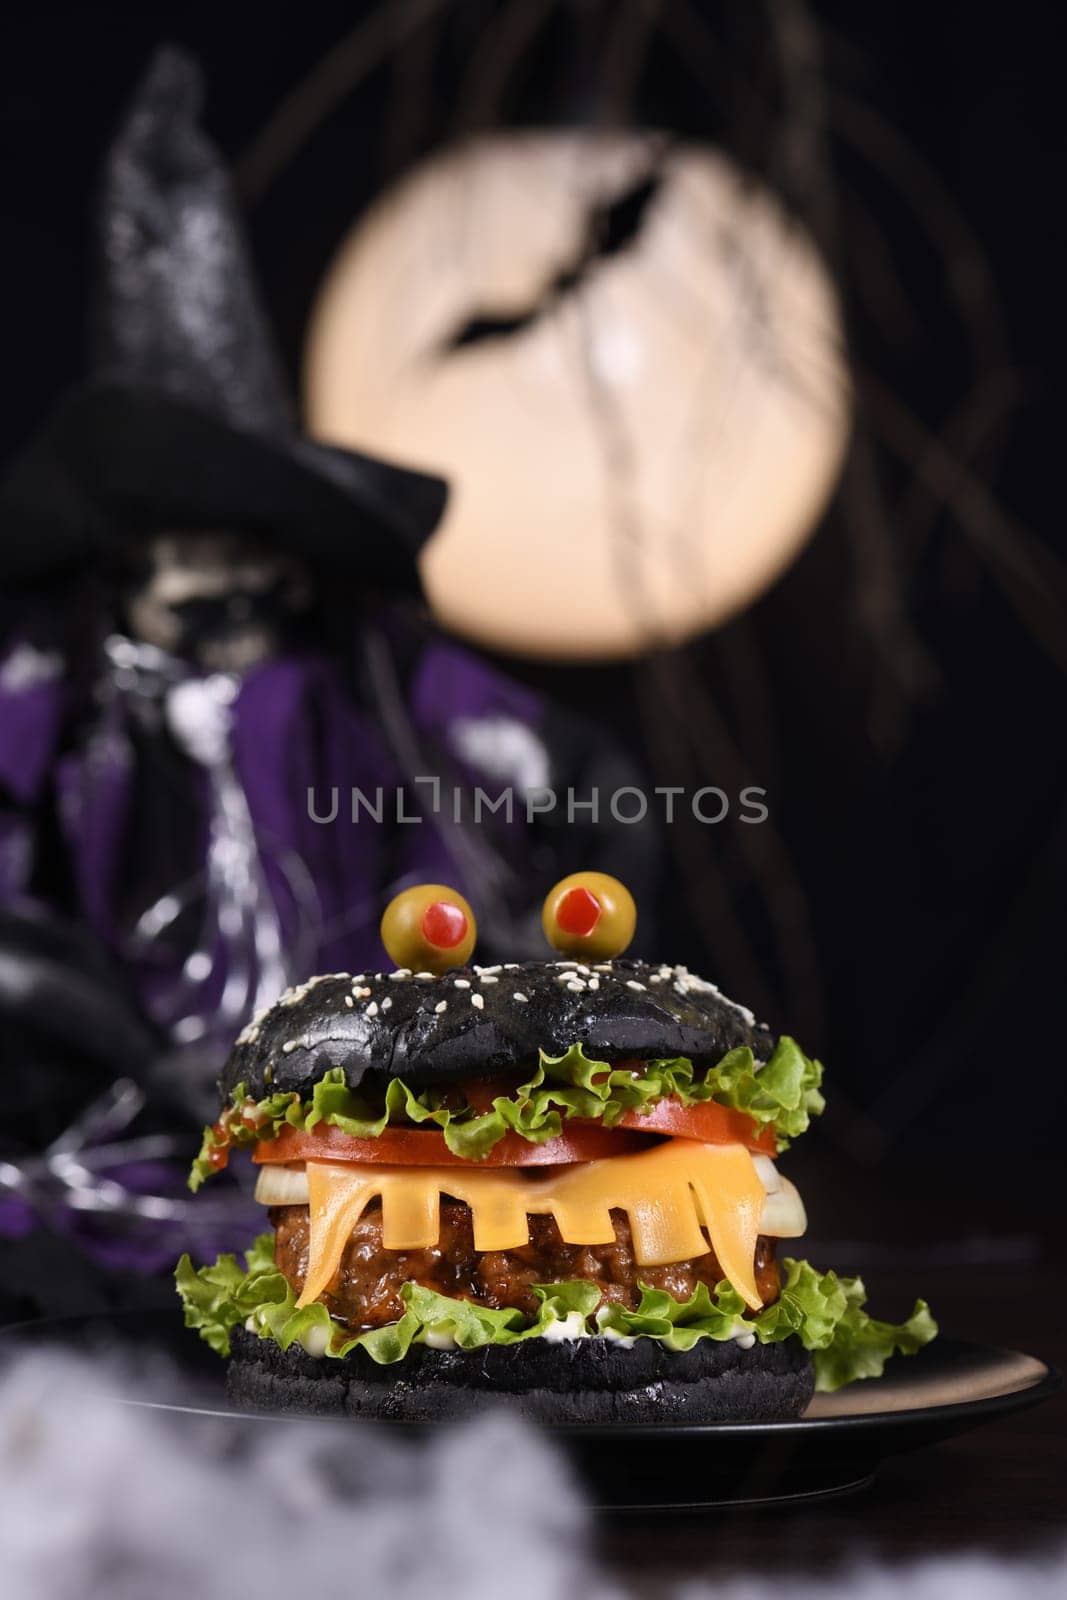 Monster Burger. Black bun, juicy beef cutlet, lettuce, onion, tomato and cheese in the shape of teeth, eyes with olives. Definitely a pick-me-up and a perfect Halloween party appetizer.